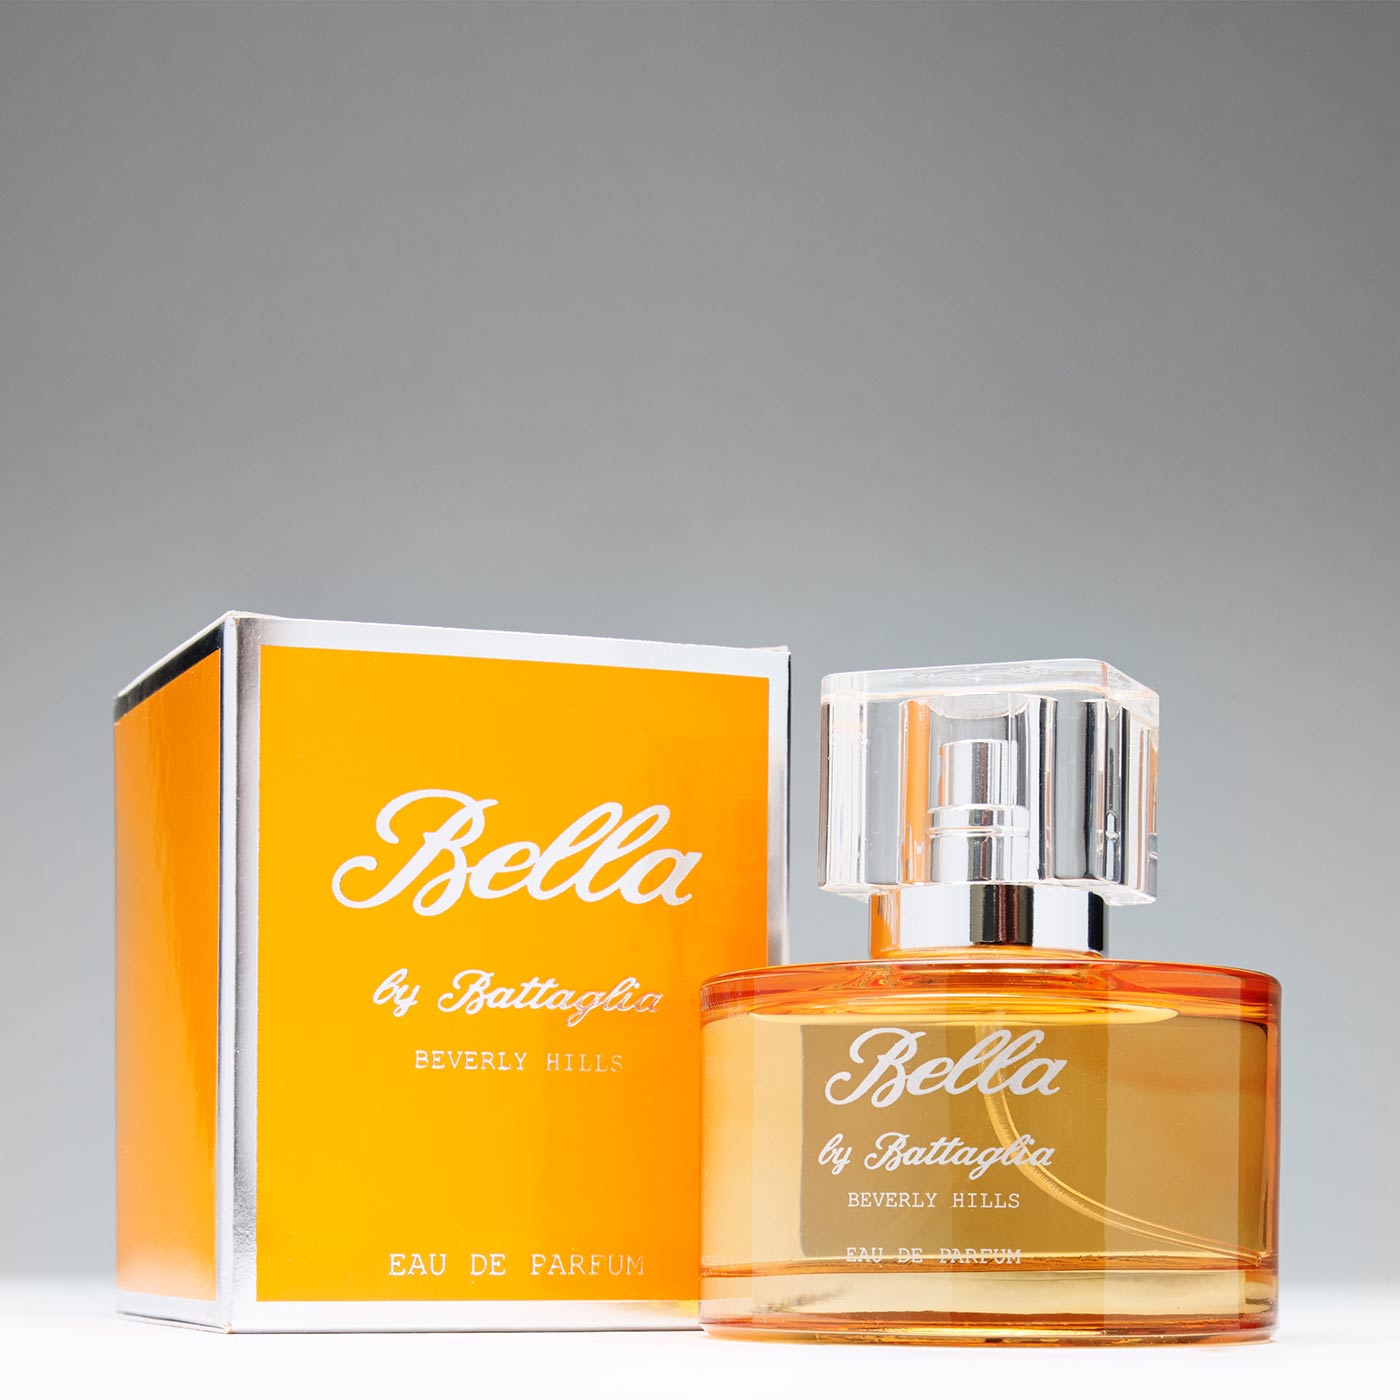 Bella by Battaglia. Sweet and ambrosial, Bella is a vivacious fragrance for women who are attracted to a playful scent.